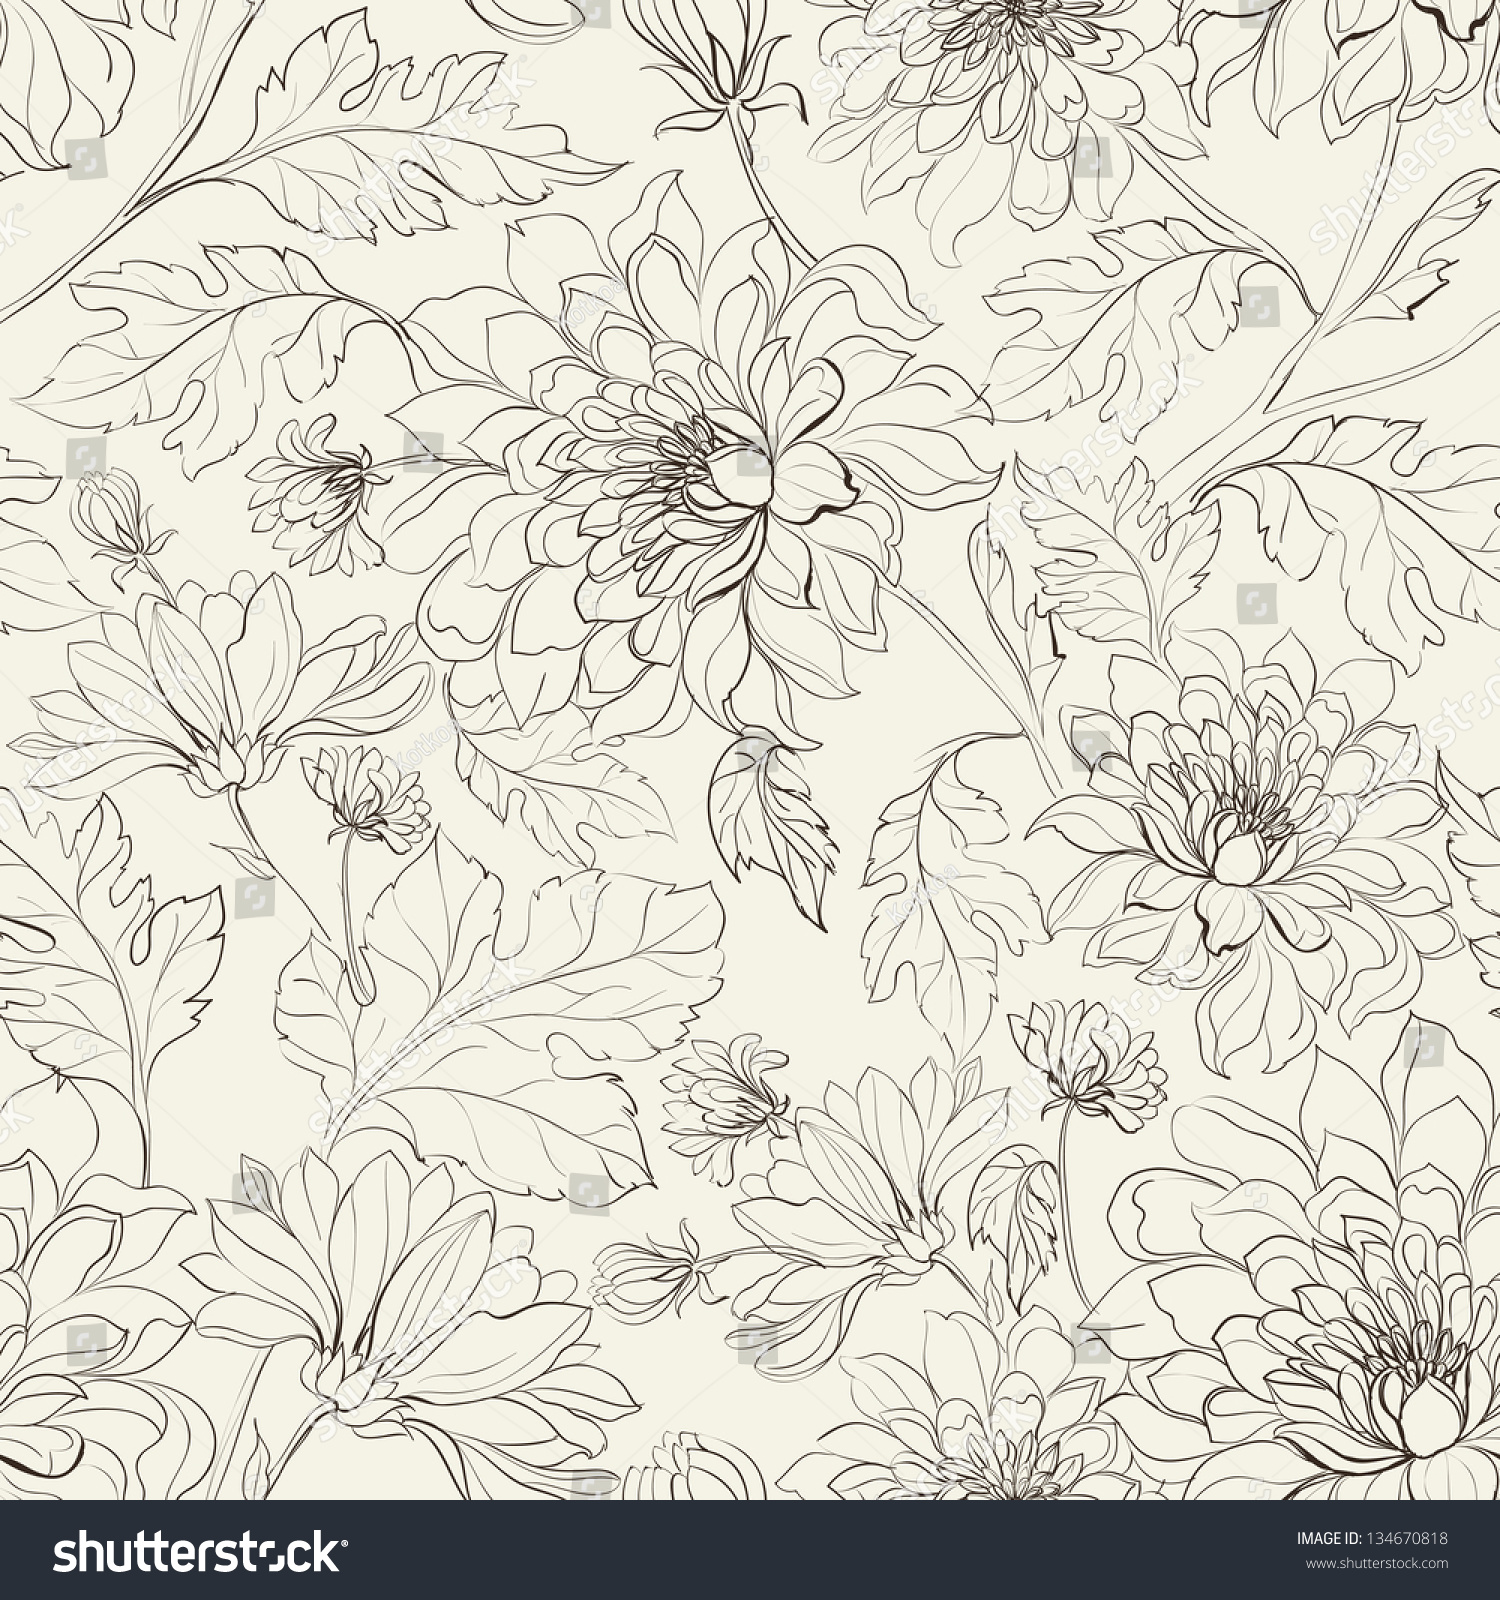 Seamless floral pattern with chrysanthemums. Vector illustration. #134670818